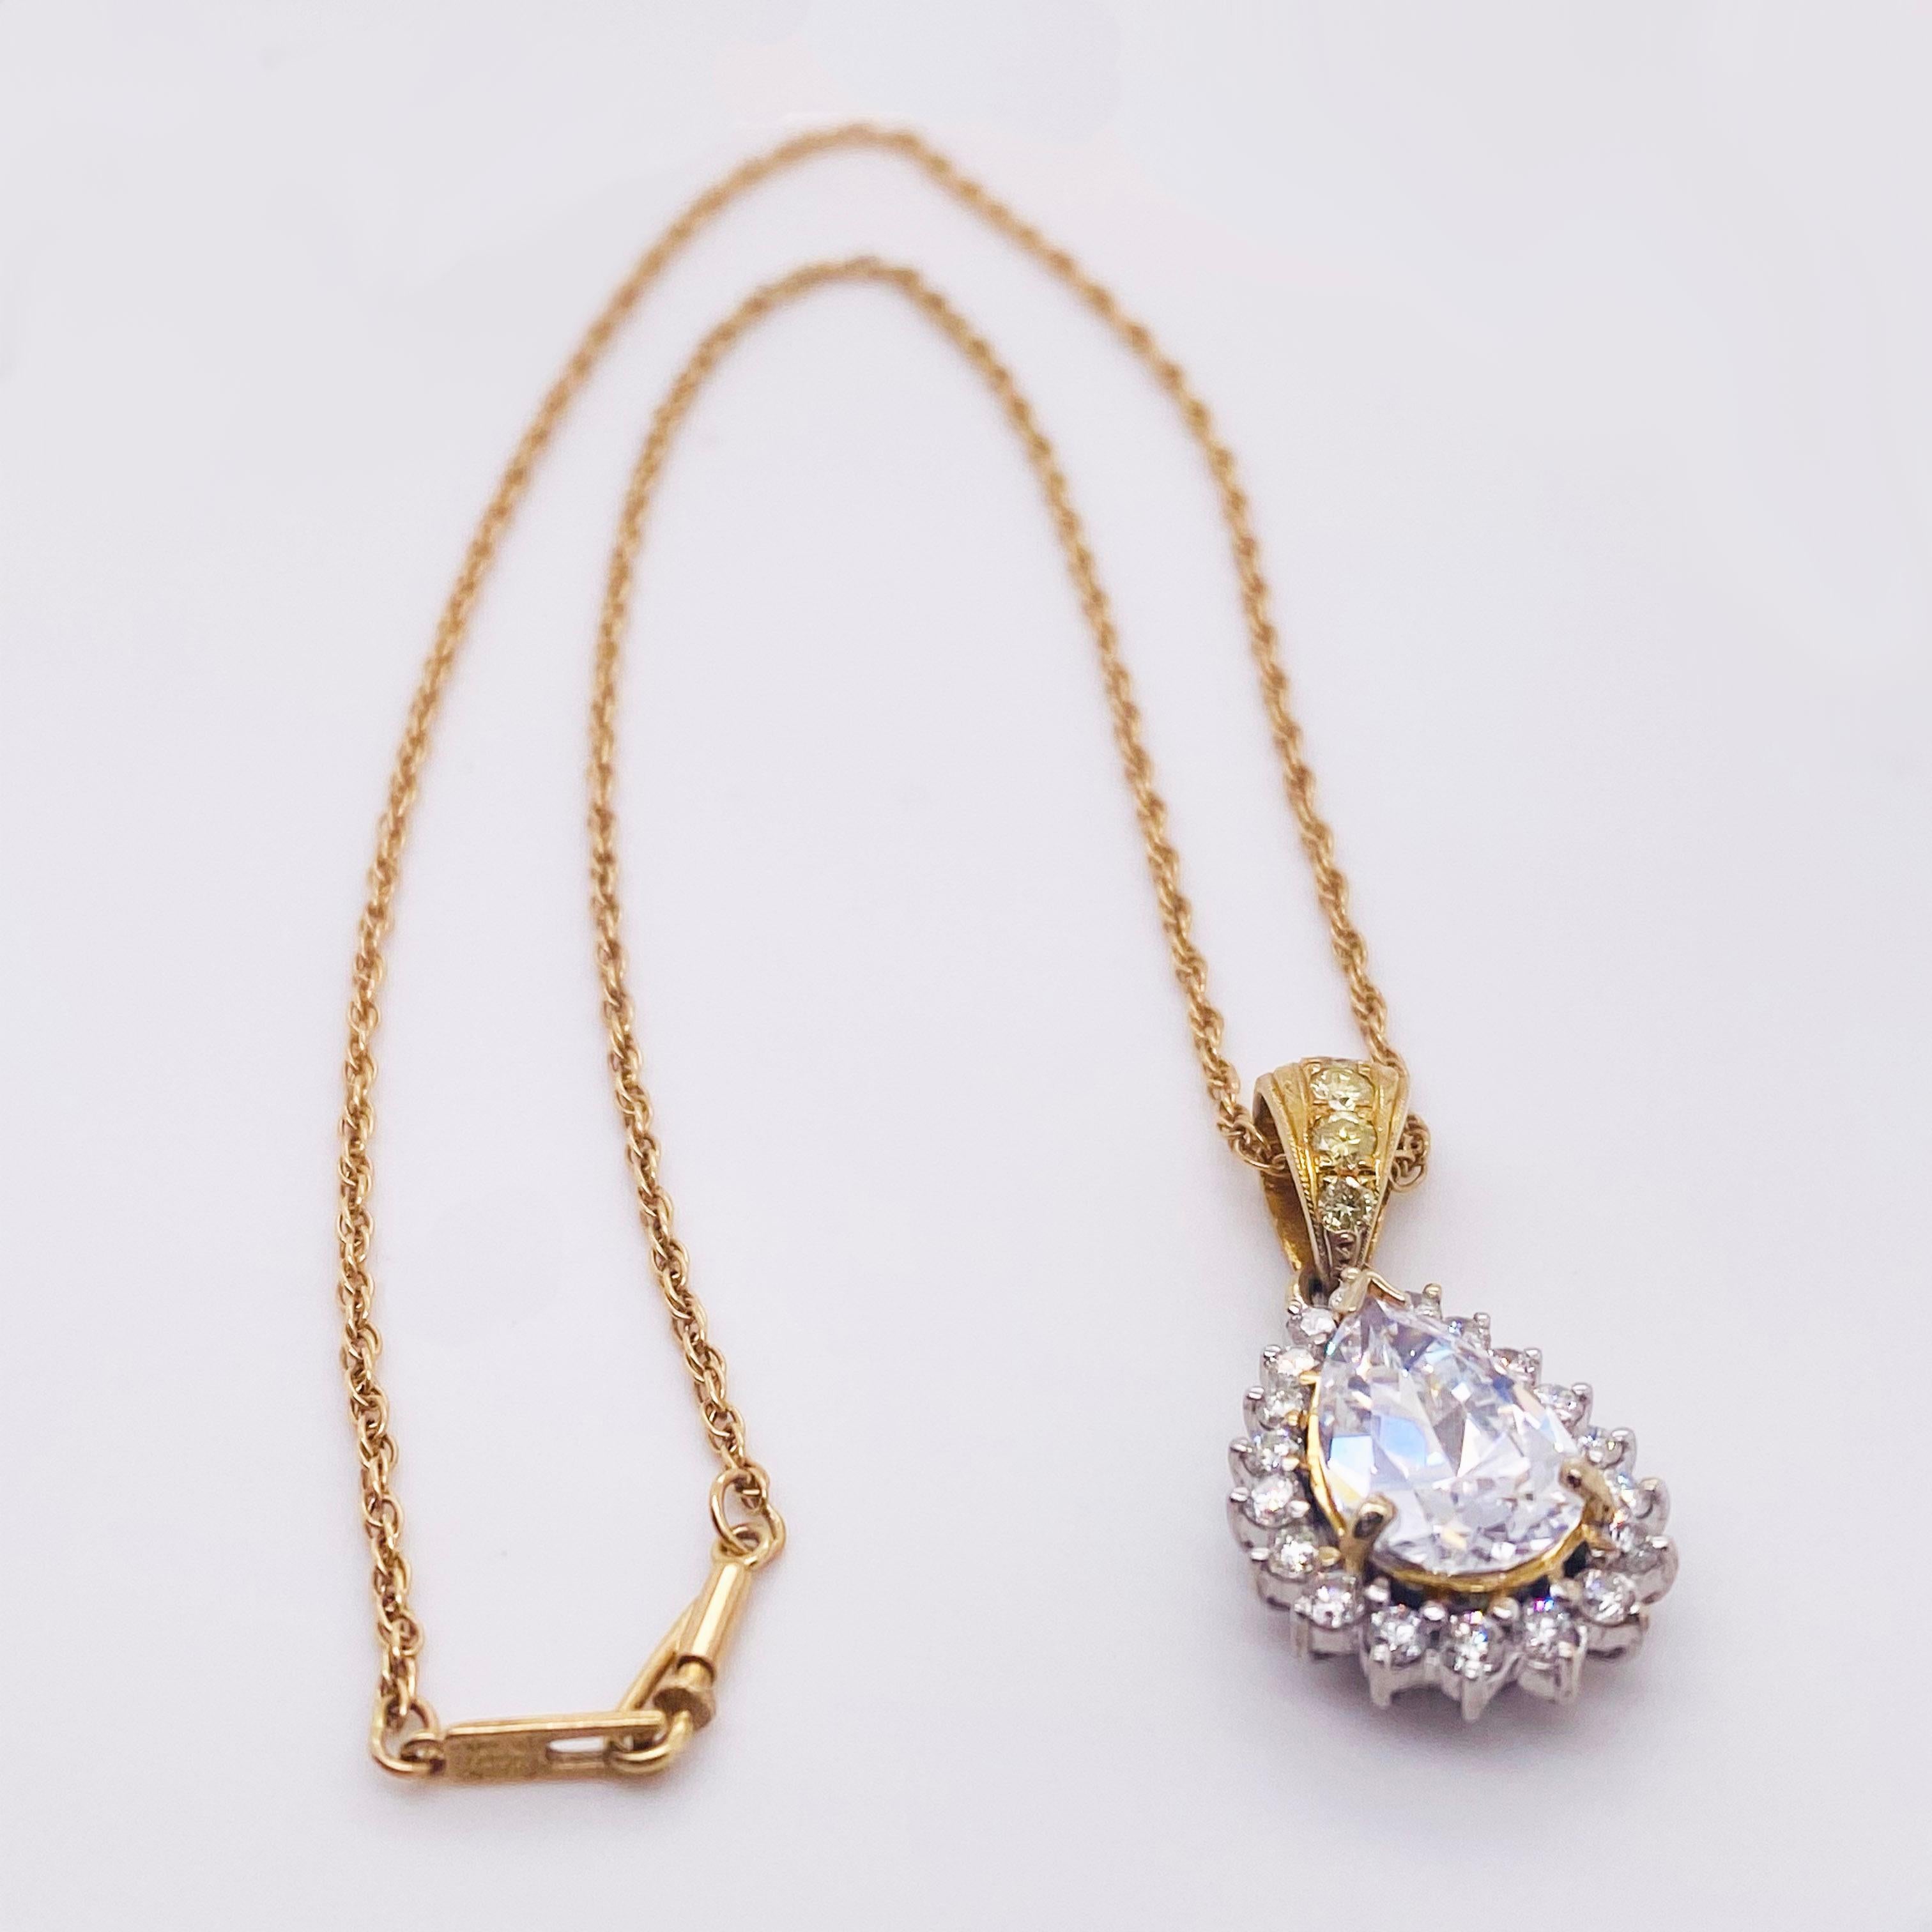 4.2 Carat White & Yellow Diamond Pendant Necklace 18K Yellow Gold  In New Condition For Sale In Austin, TX